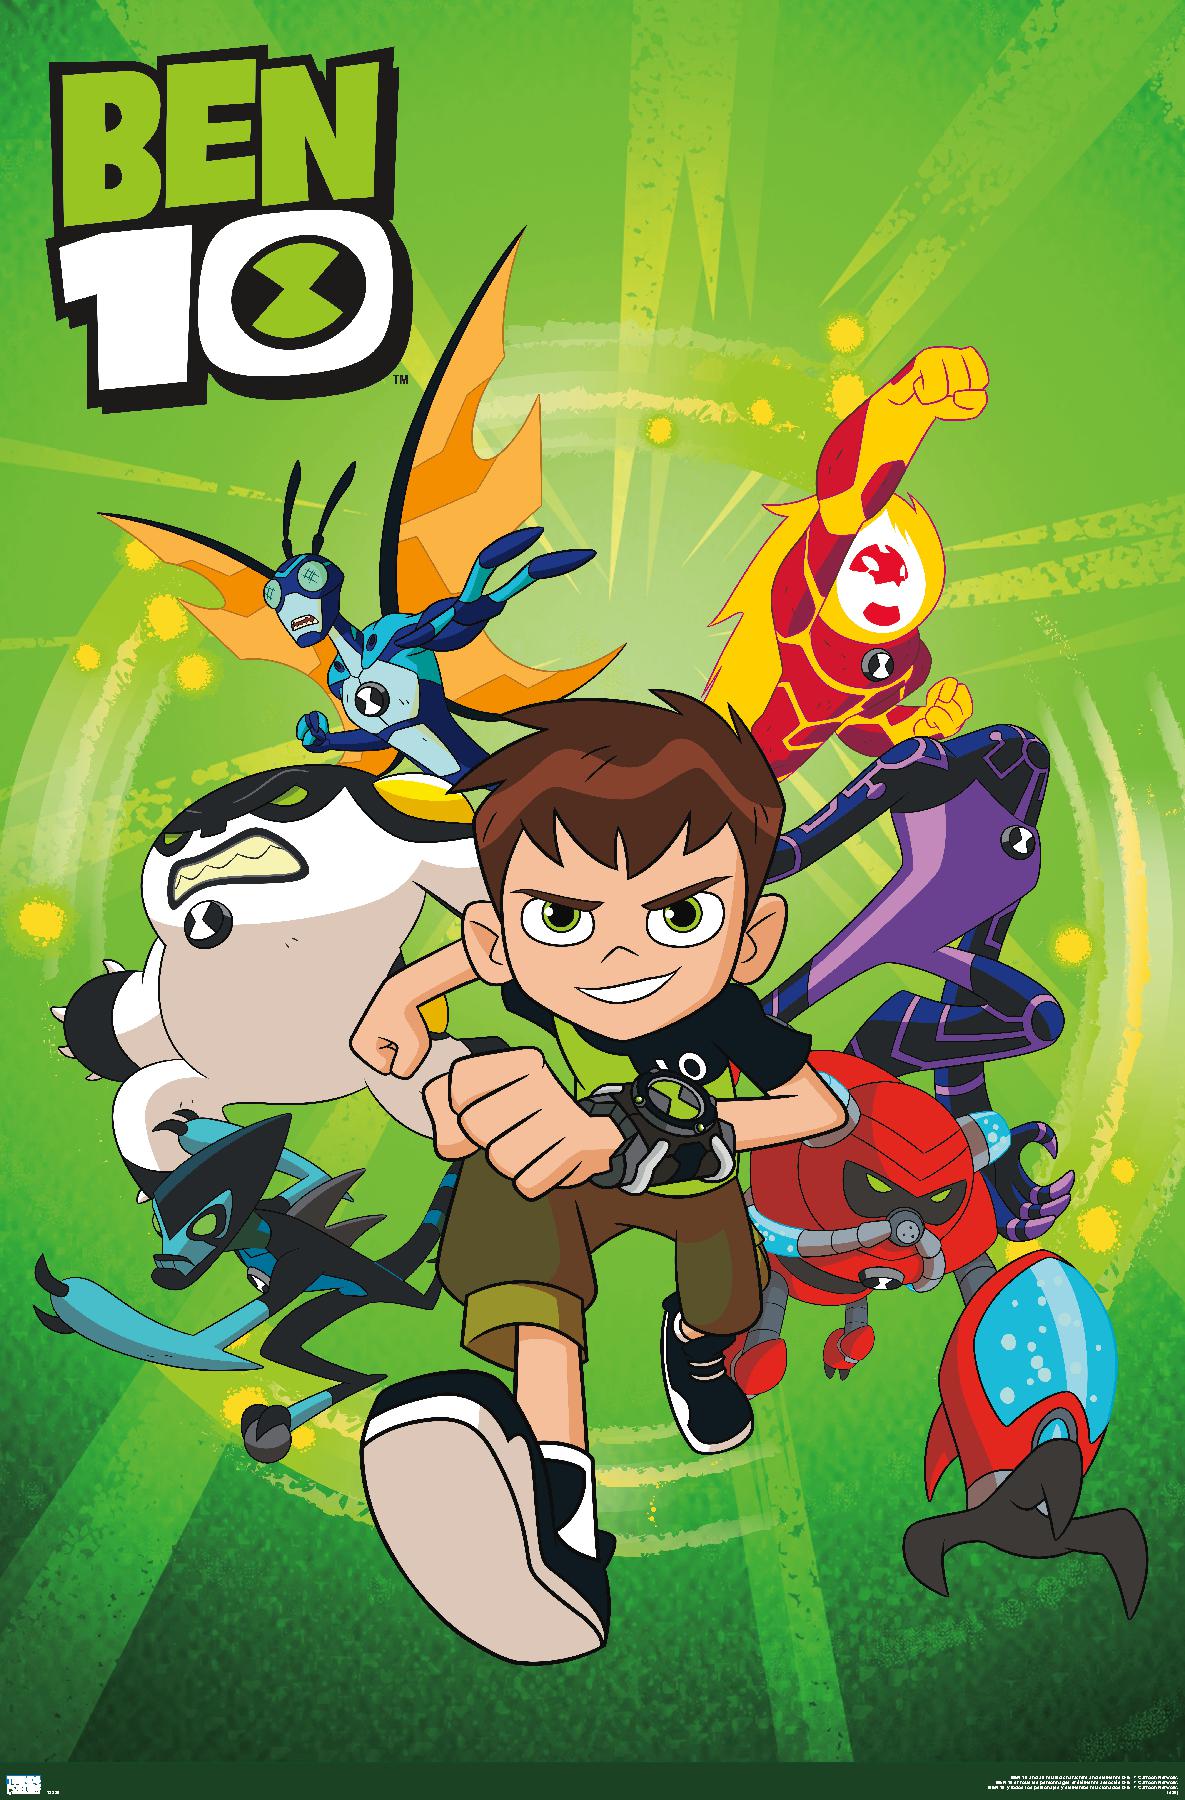 Ben 10 - Group Wall Poster, 14.725" x 22.375" - image 1 of 3